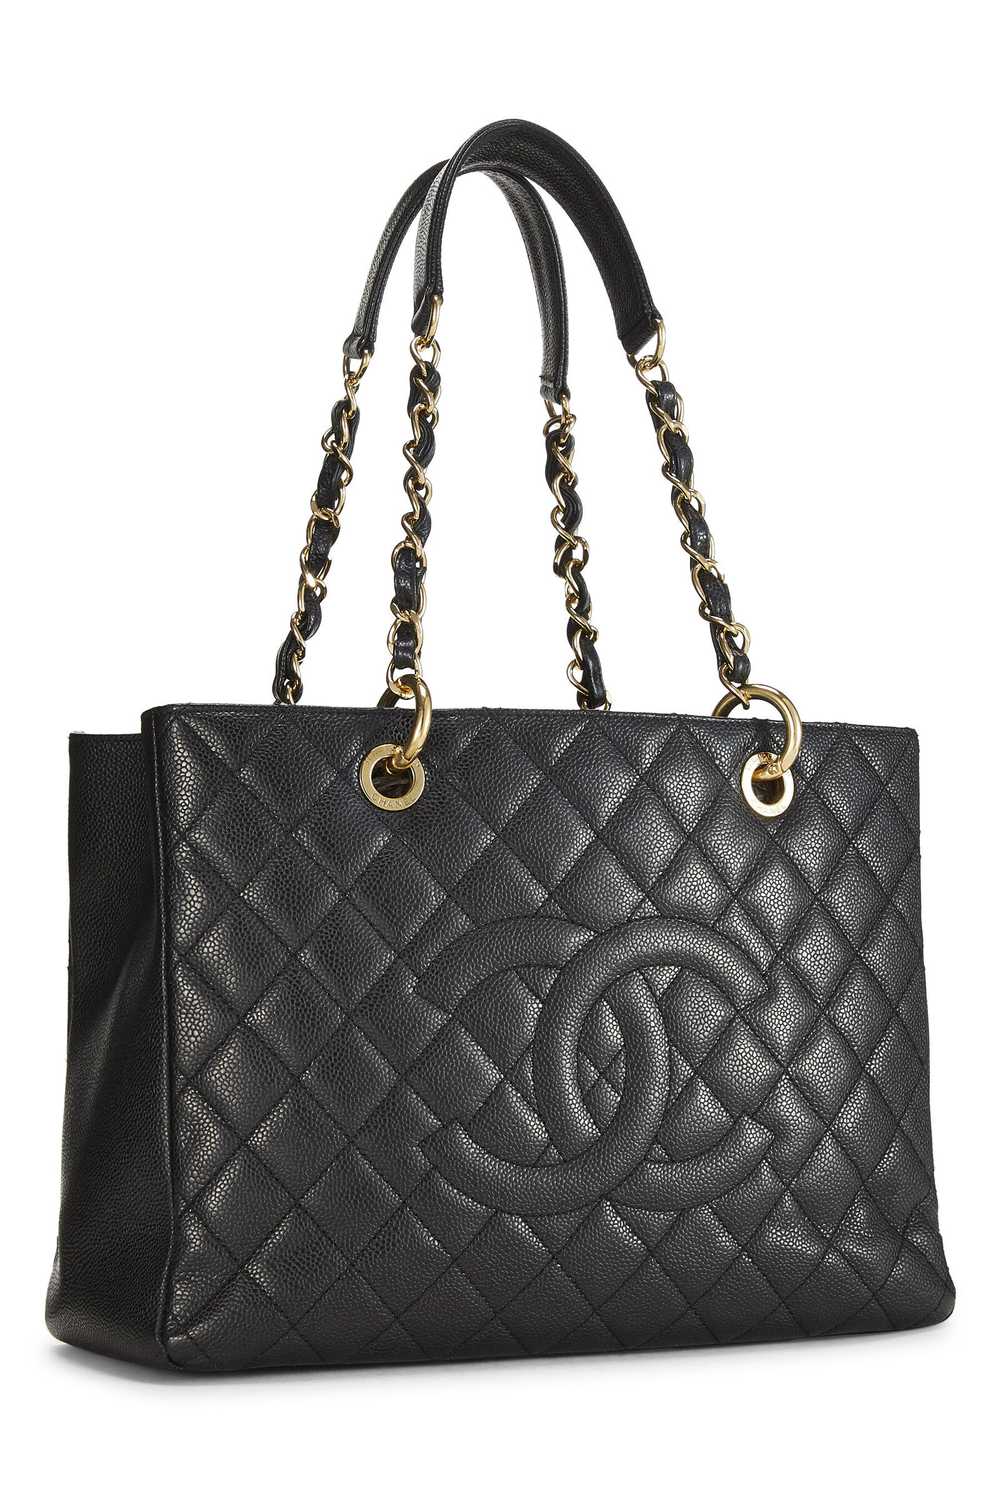 Black Quilted Caviar Grand Shopping Tote (GST) - image 2